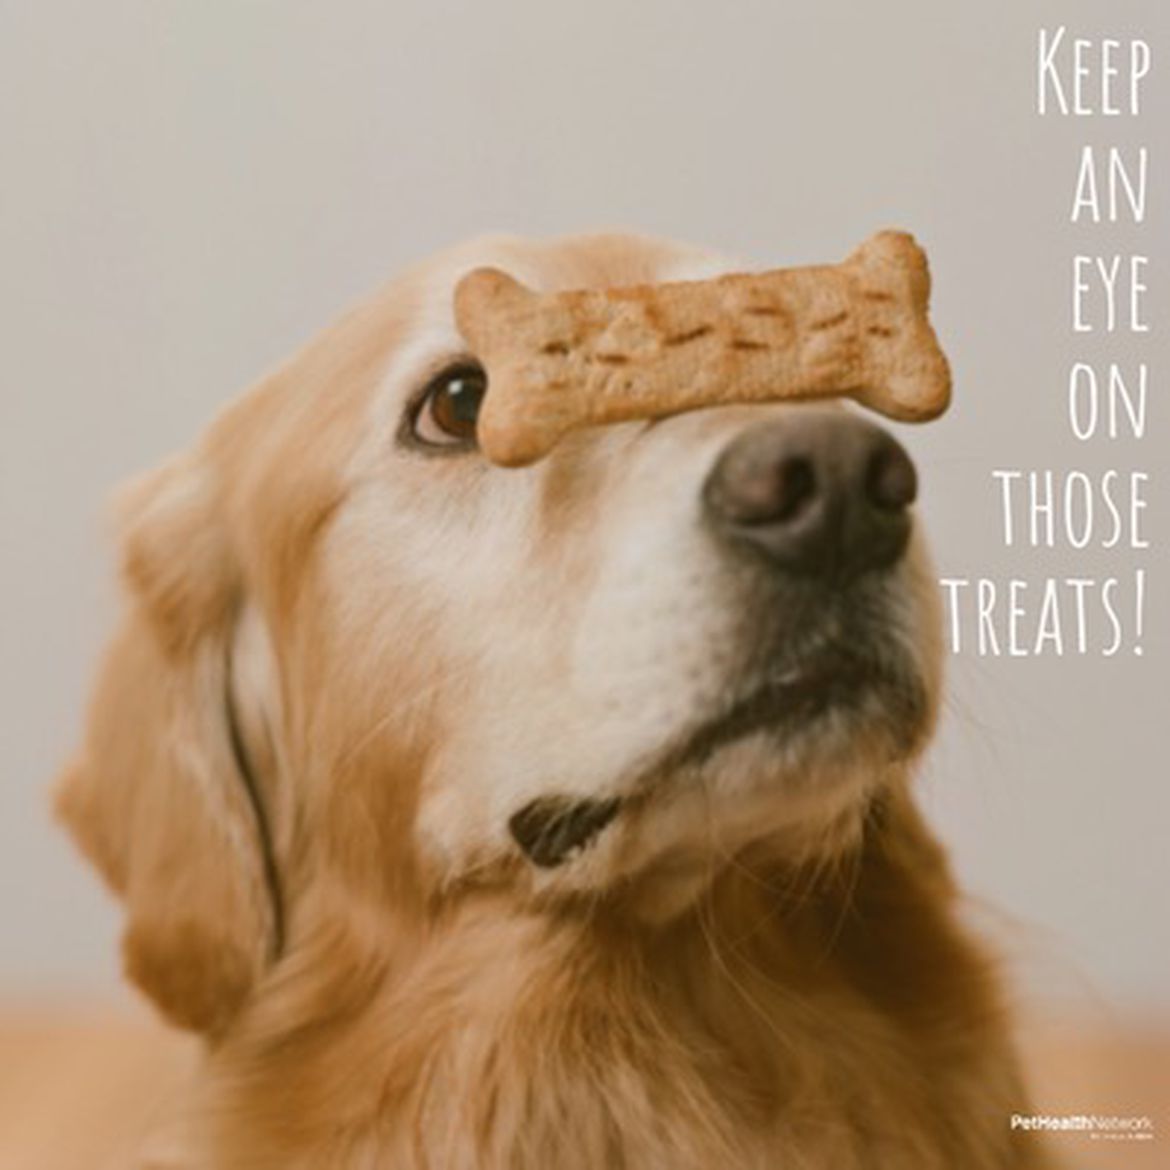 Social media post for veterinary practices to share during COVID-19 about watching how many treats their dogs eat.